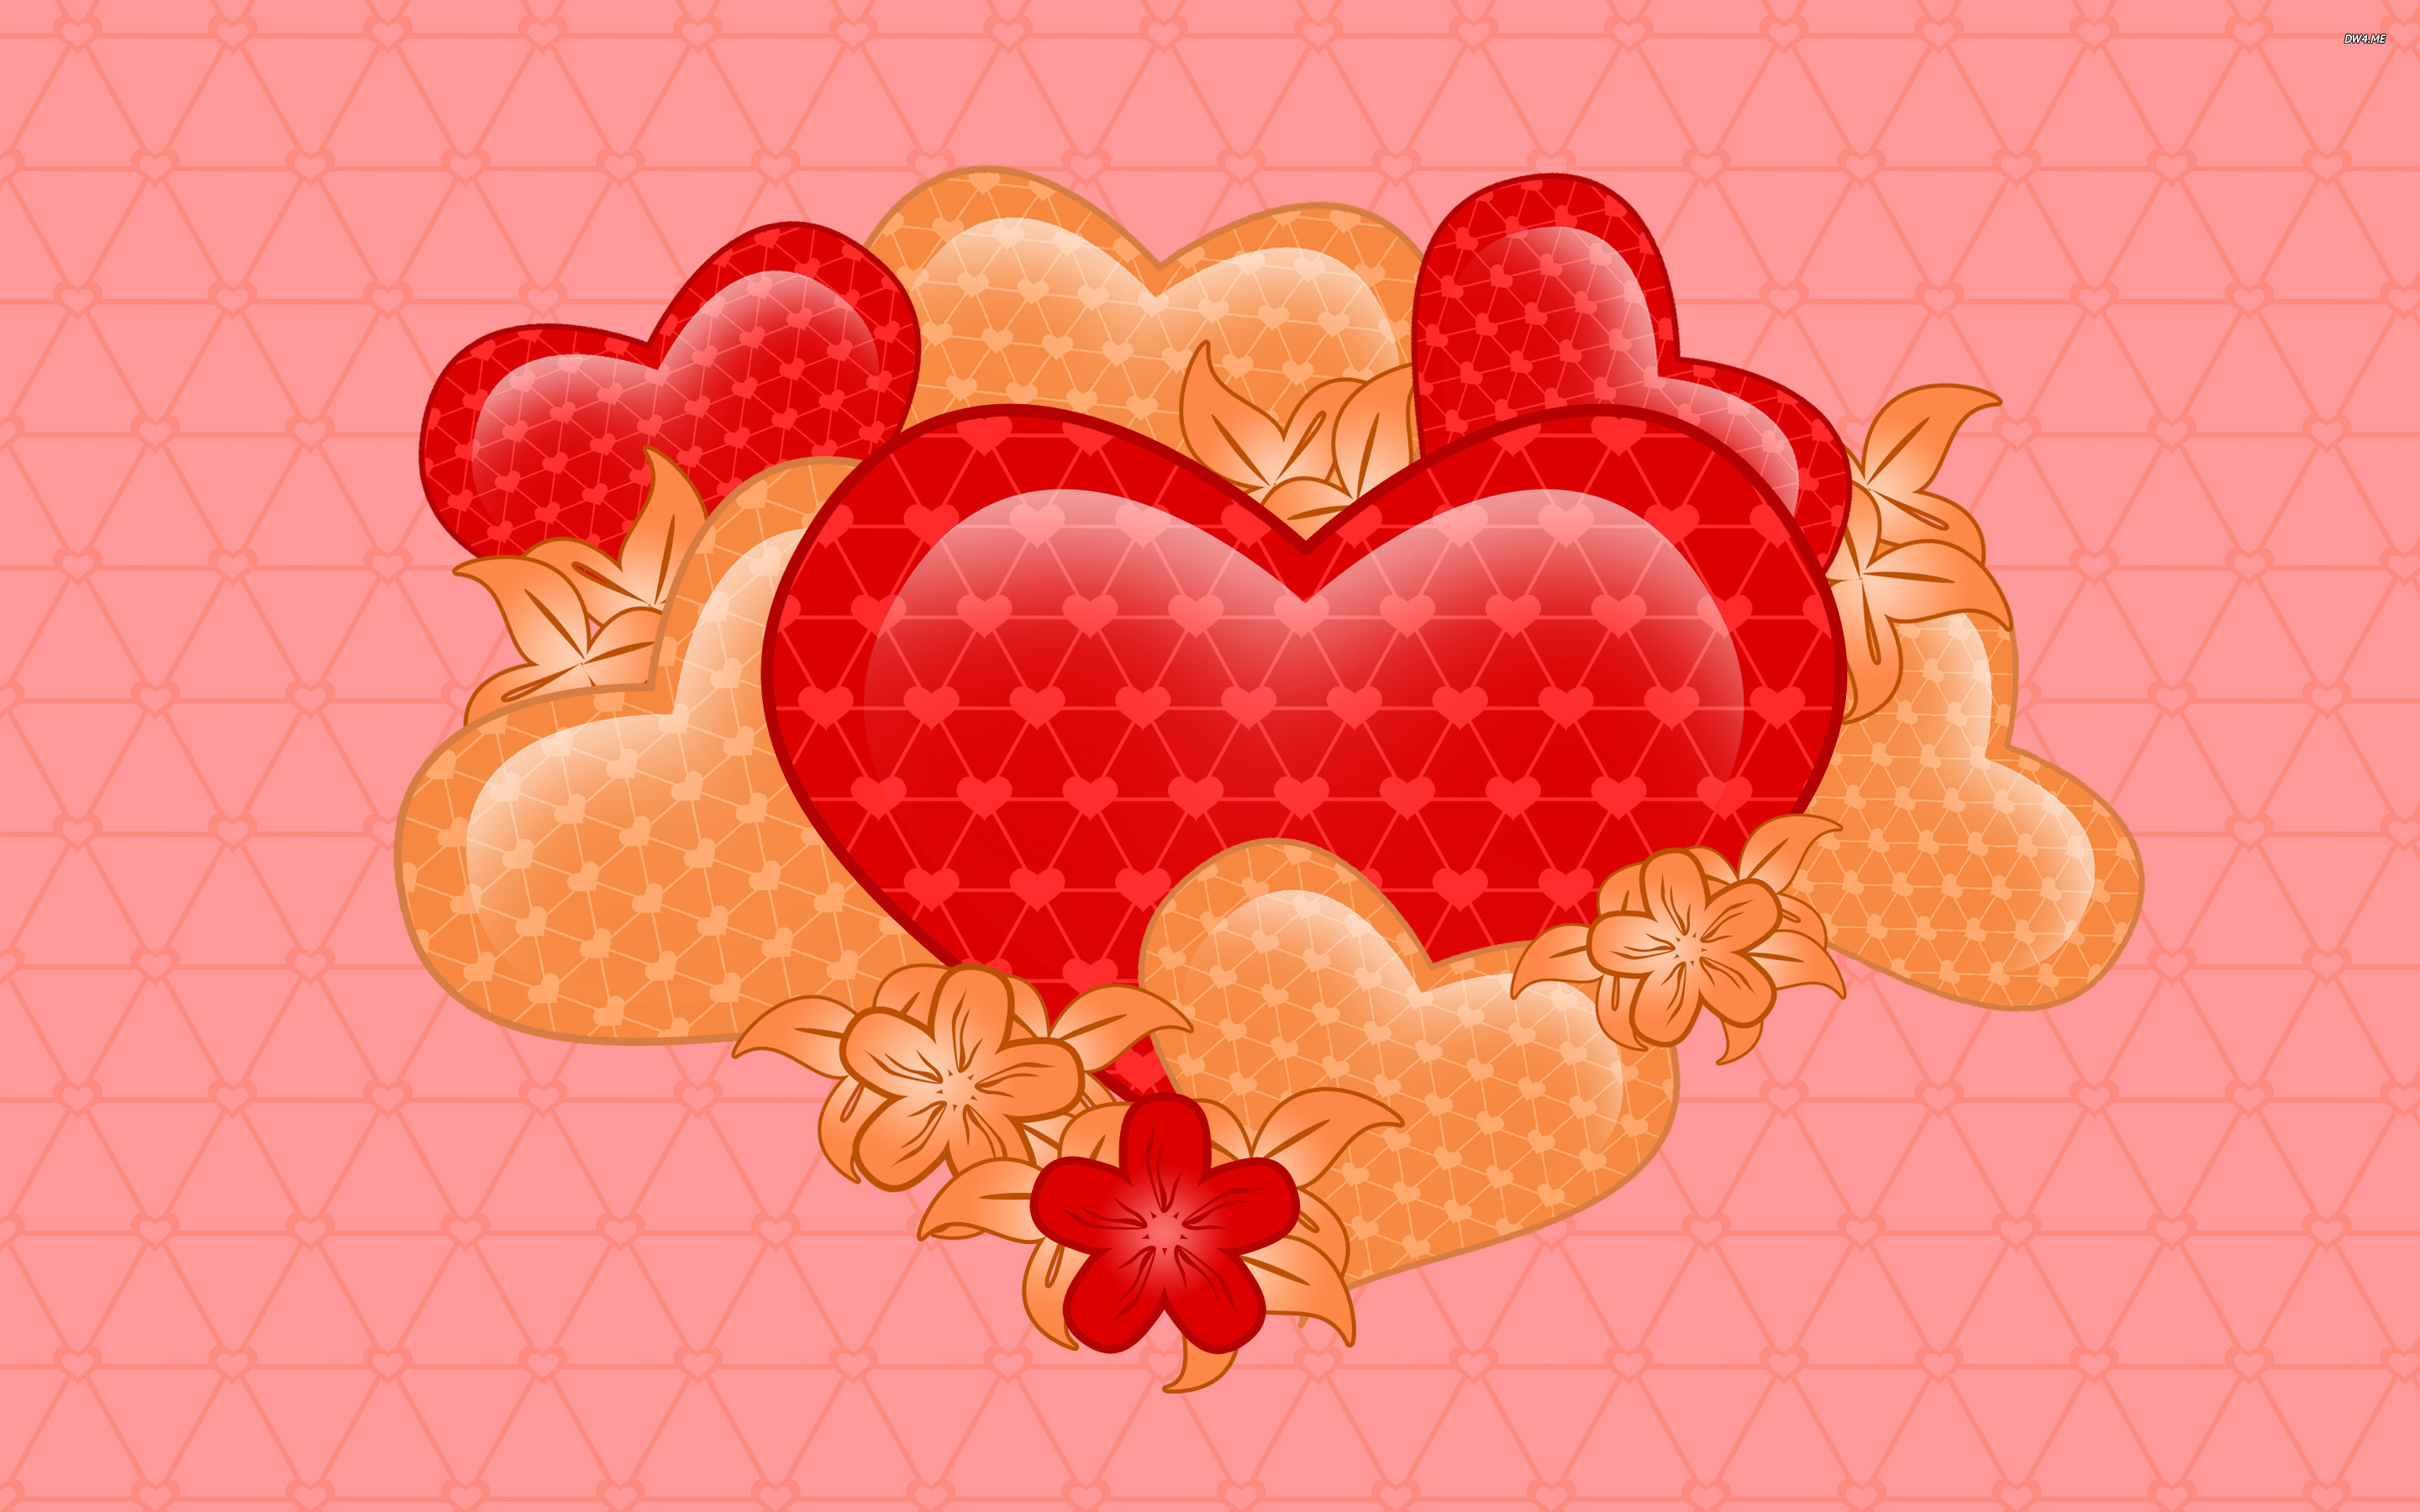 Hearts And Flowers Wallpaper Holiday